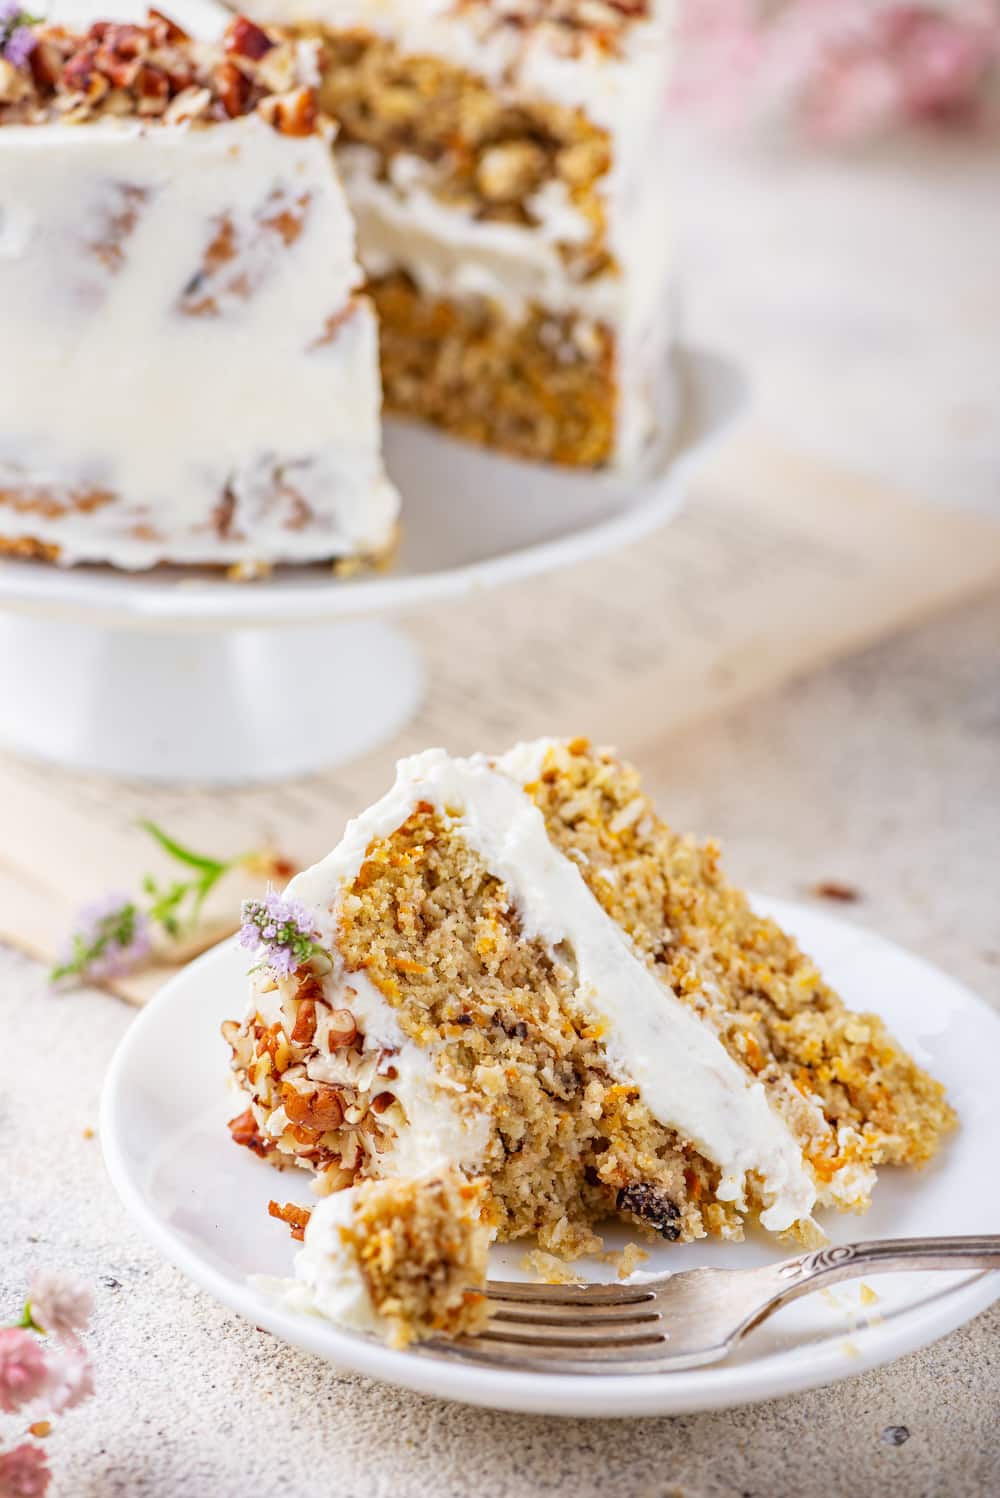 A slice of carrot cake served on a white plate, with a piece of the cake on a fork and the entire cake behind it.